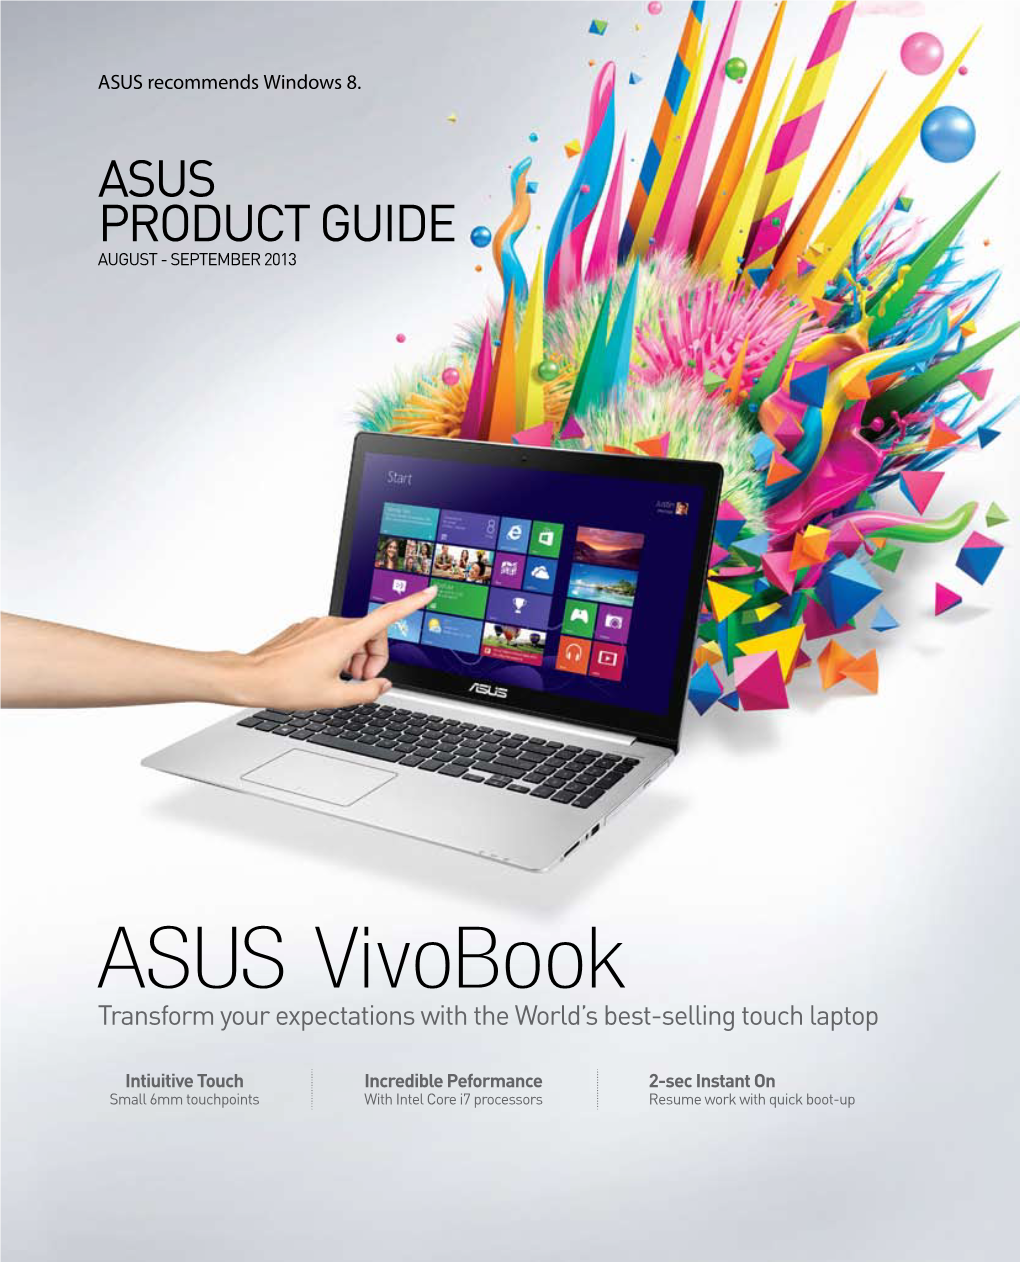 Asus Product Guide August - September 2013